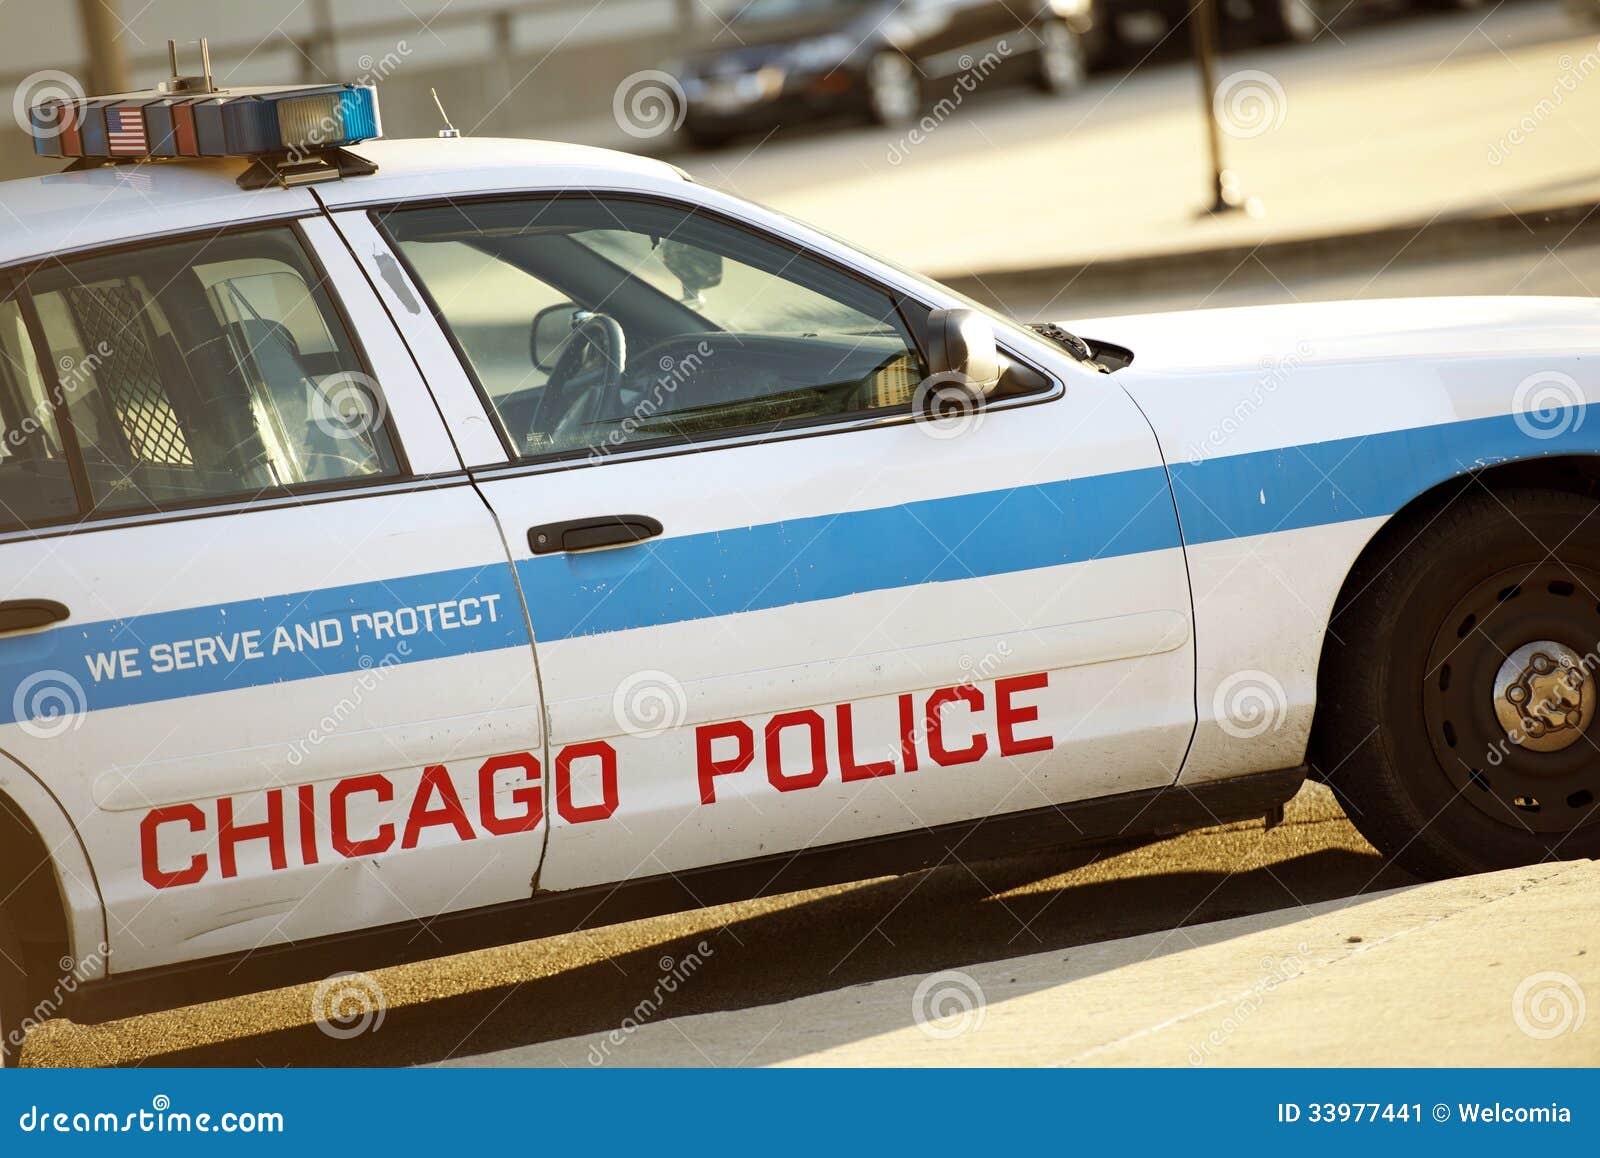 police cruiser in chicago